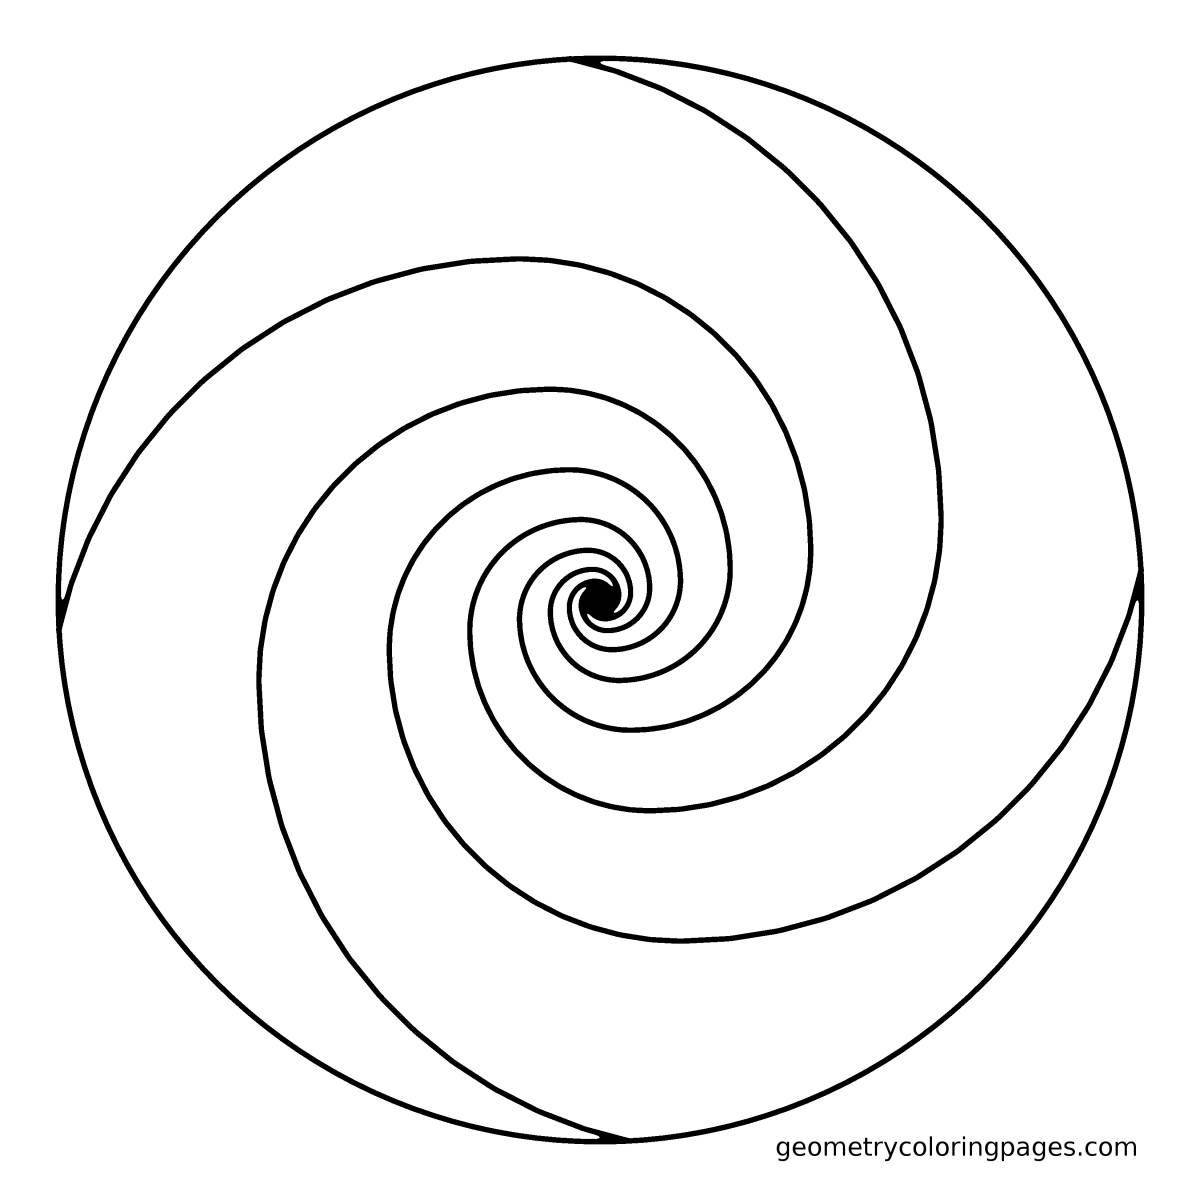 Fascinating application spiral coloring page